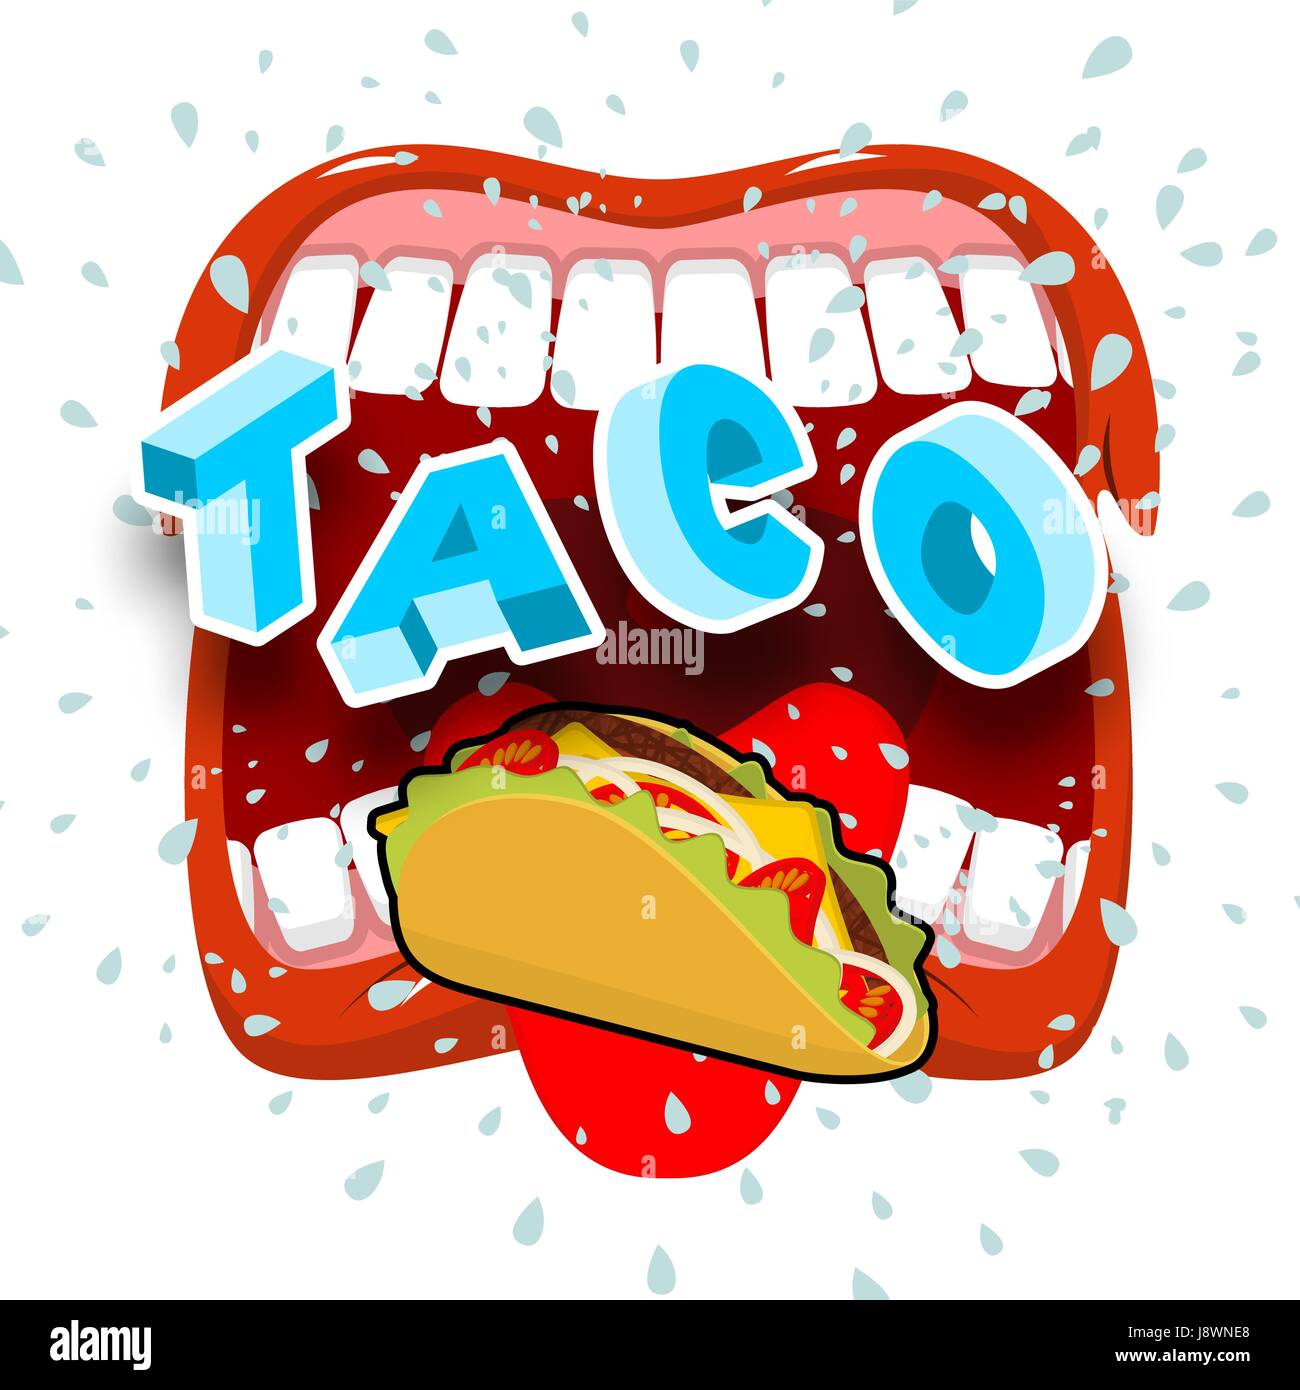 Taco acute Mexican food. Open your mouth and protruding tongue. Stock Vector